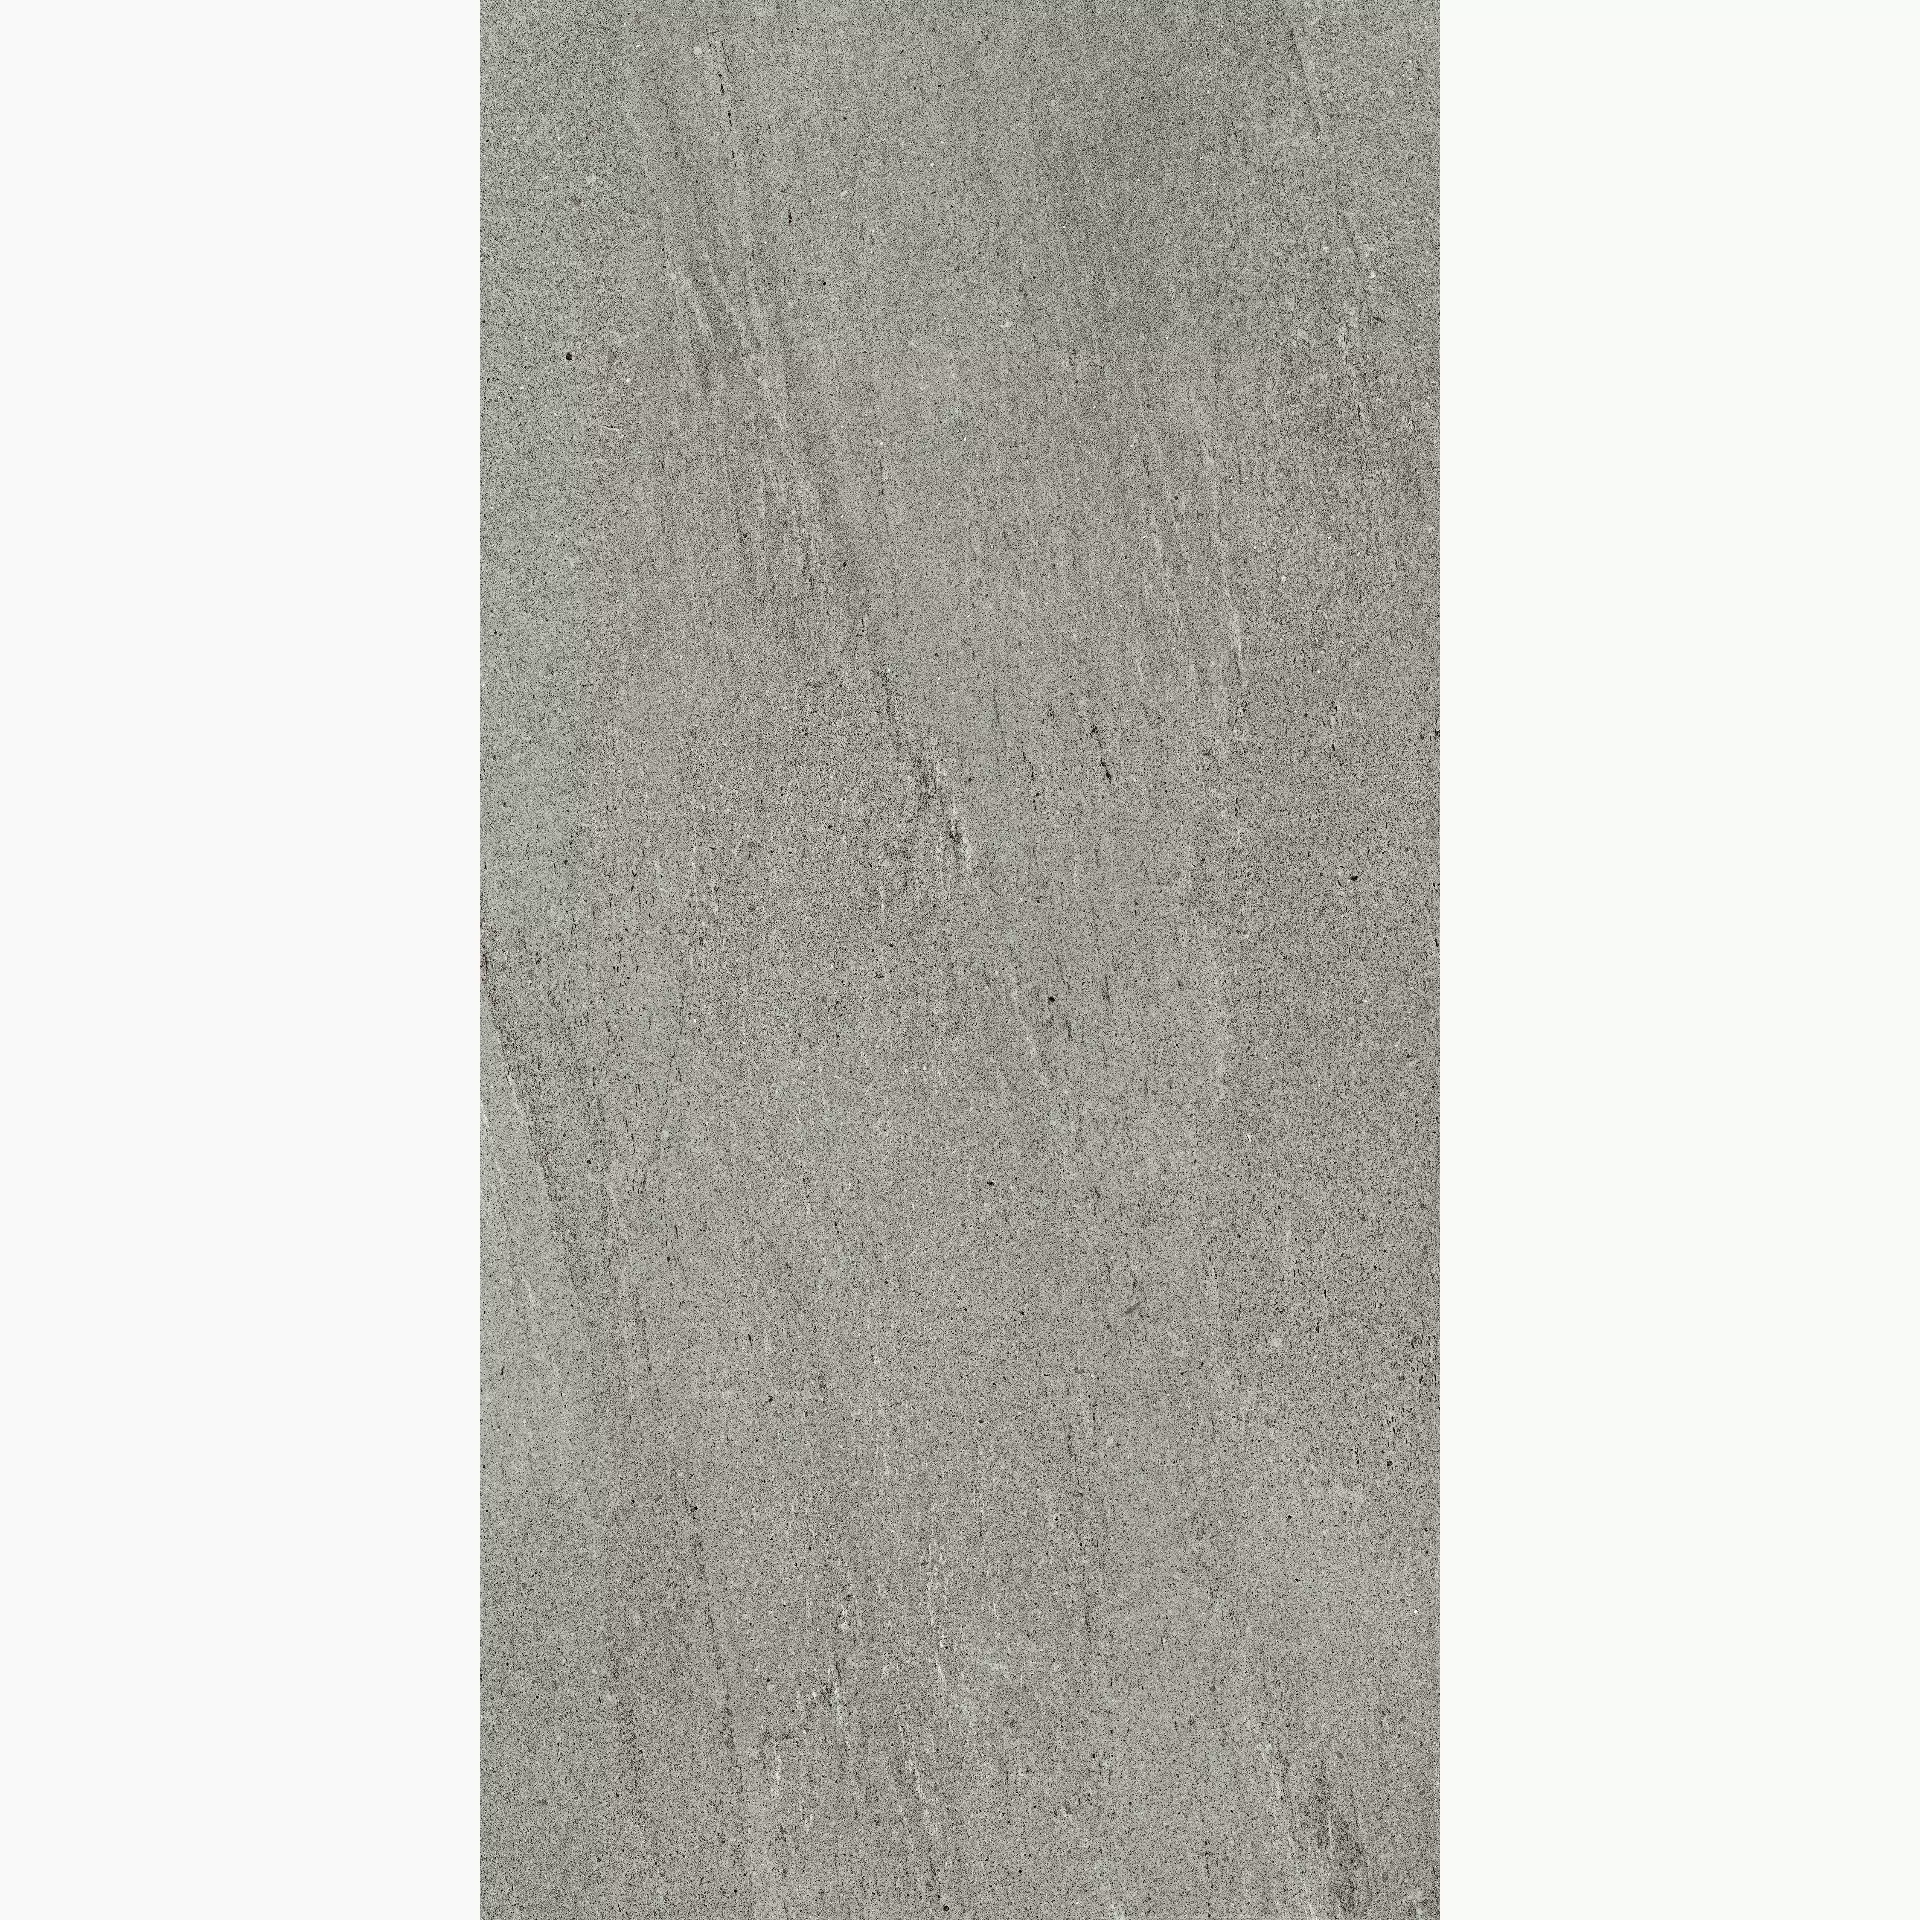 Cottodeste Blend Stone Mid Naturale Protect EGEBS30 90x180cm rectified 14mm